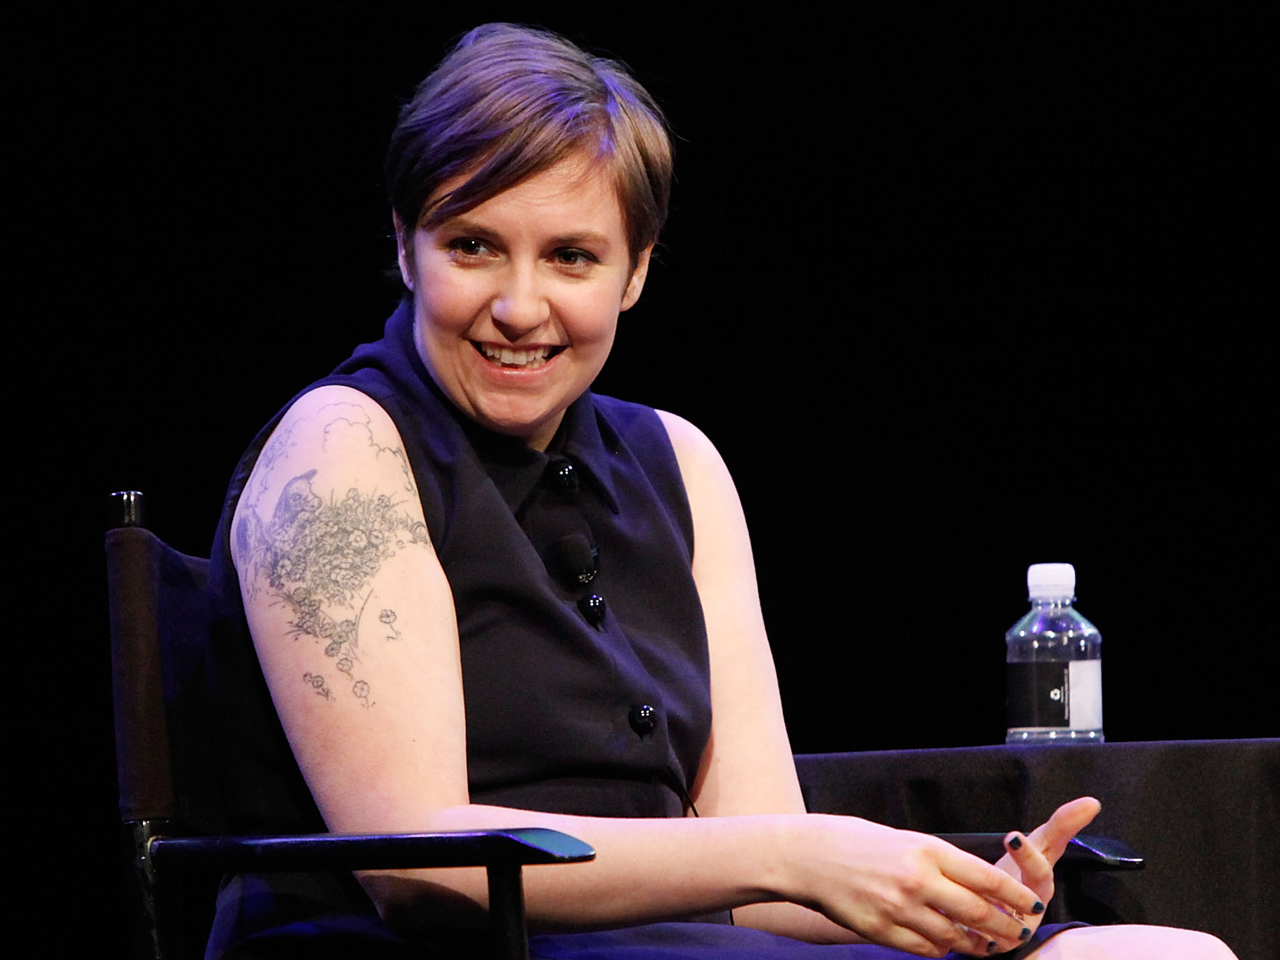 If you've evaded living under a rock this past week, you've probably also heard about the bidding war over Lena Dunham's forthcoming book of essays that ...